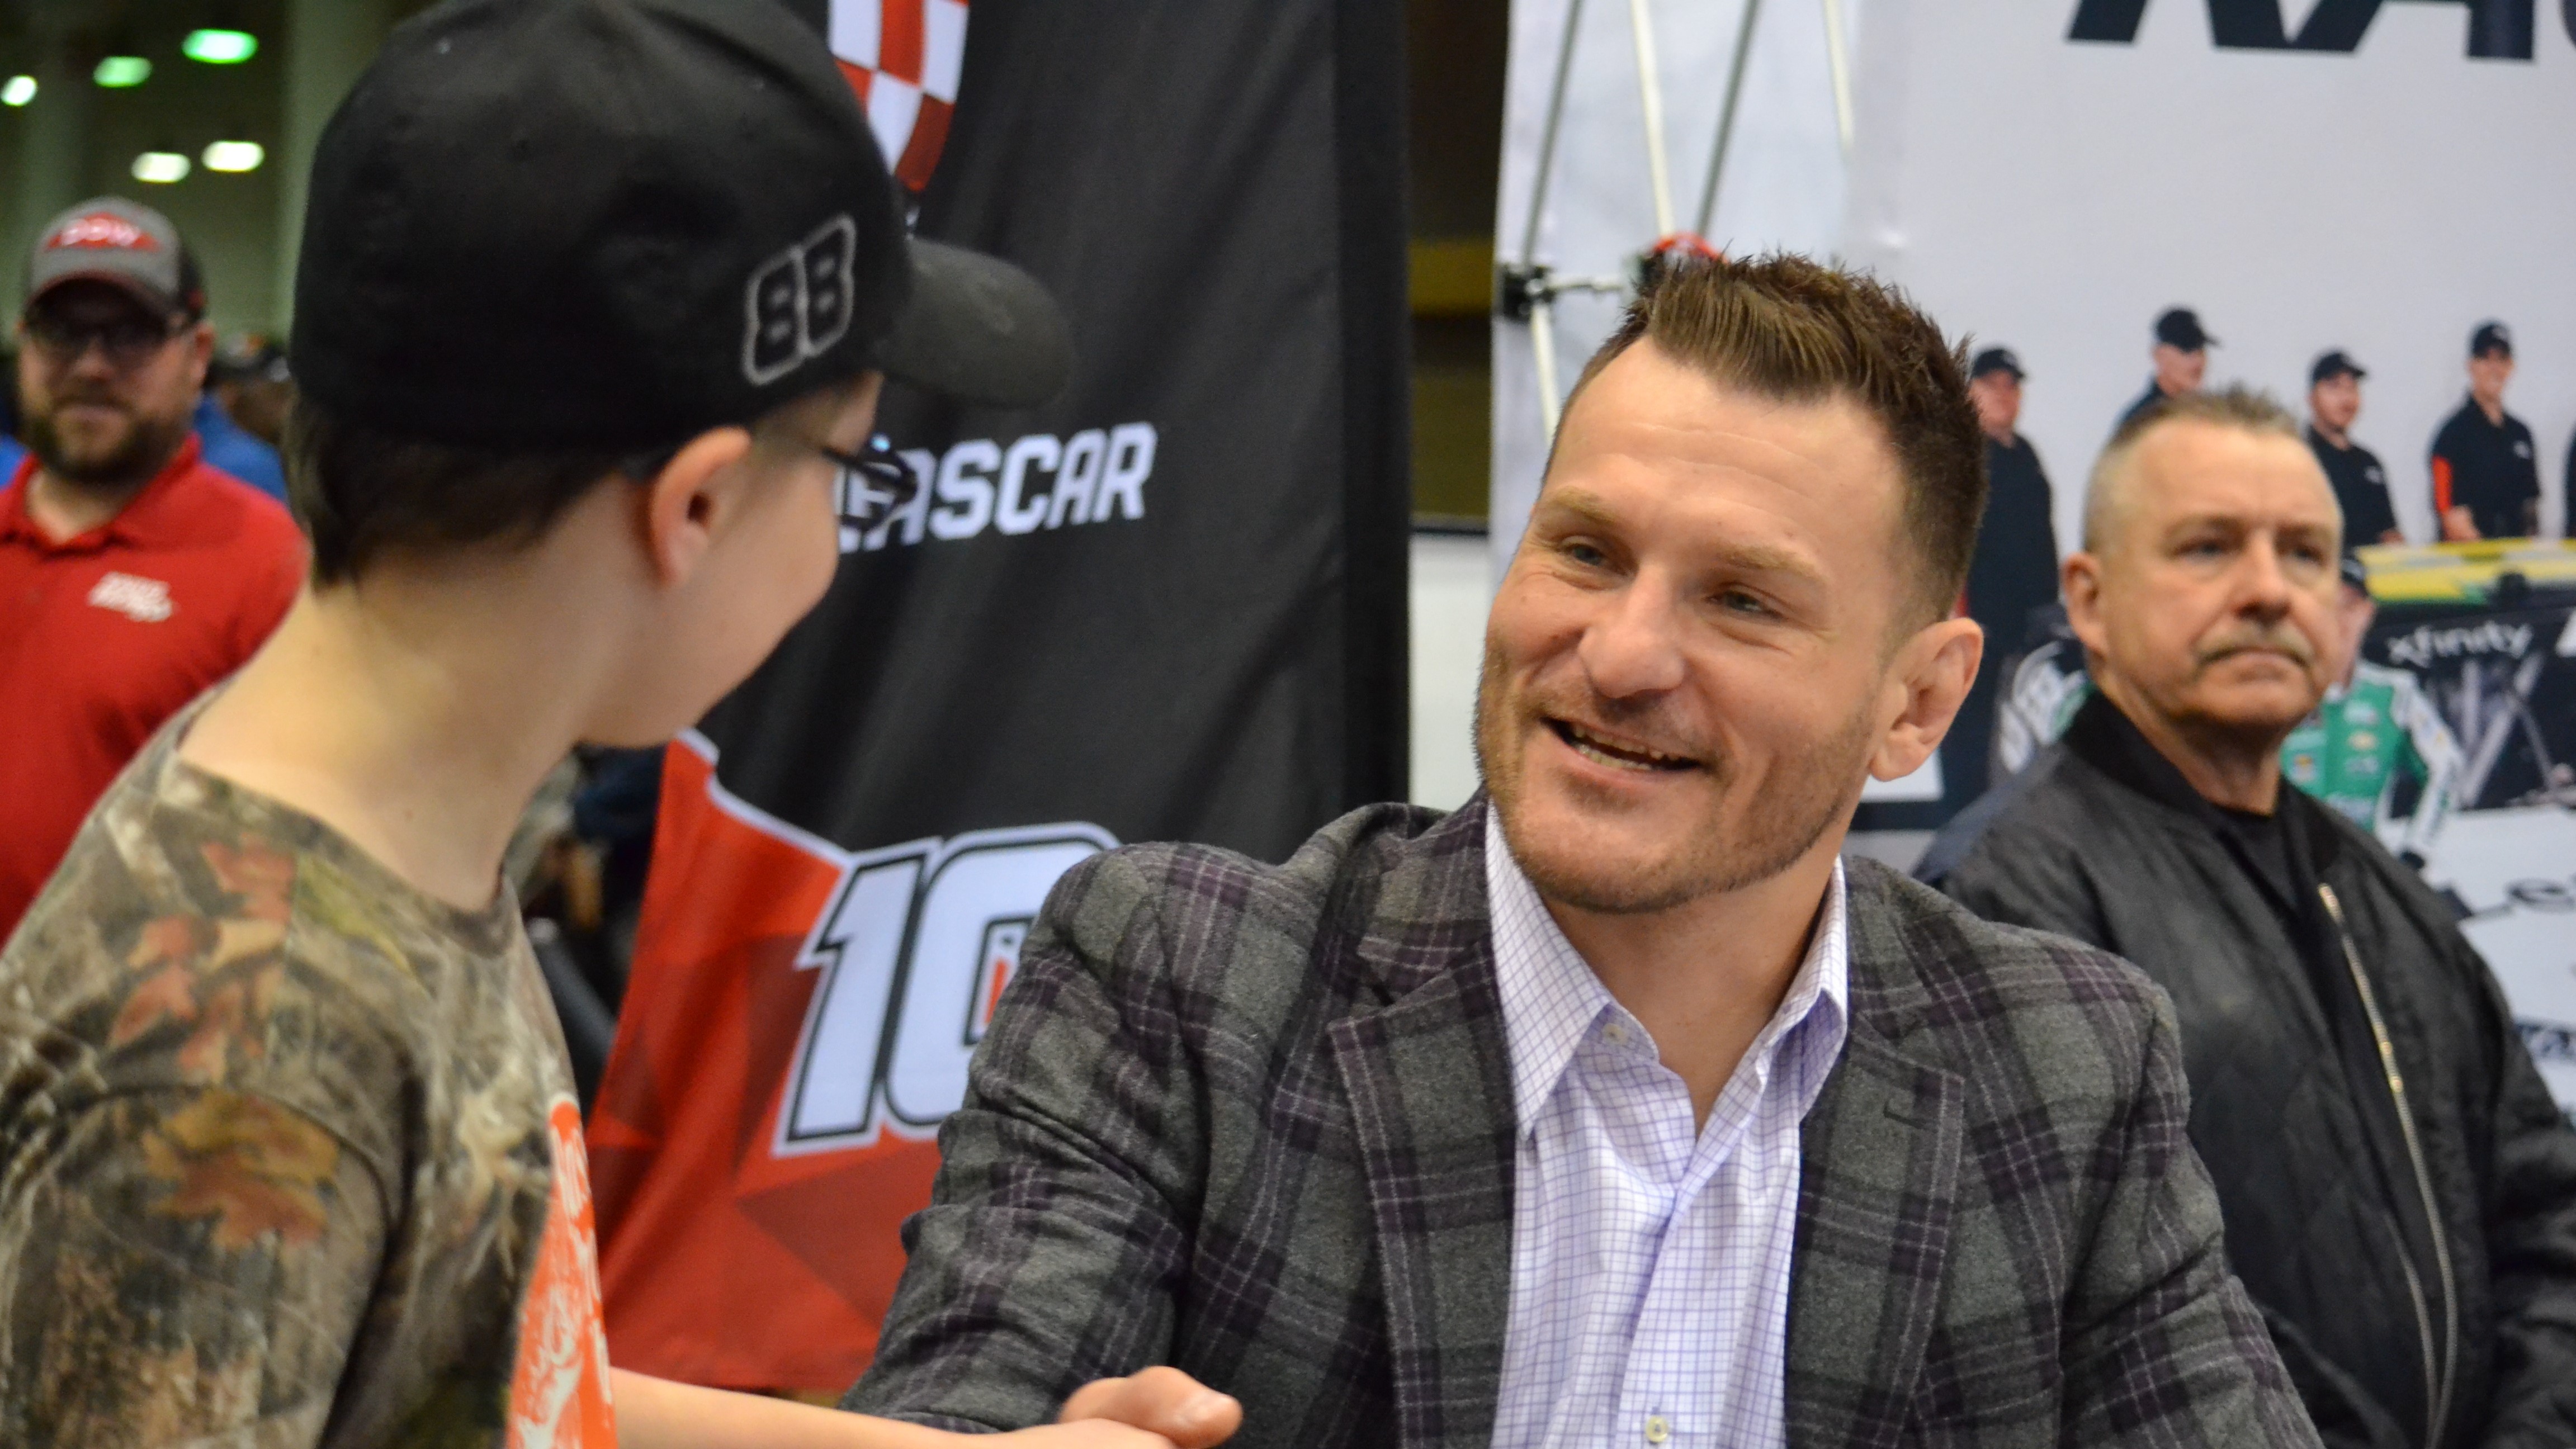 Former UFC champ Stipe Miocic receives support from fans at 